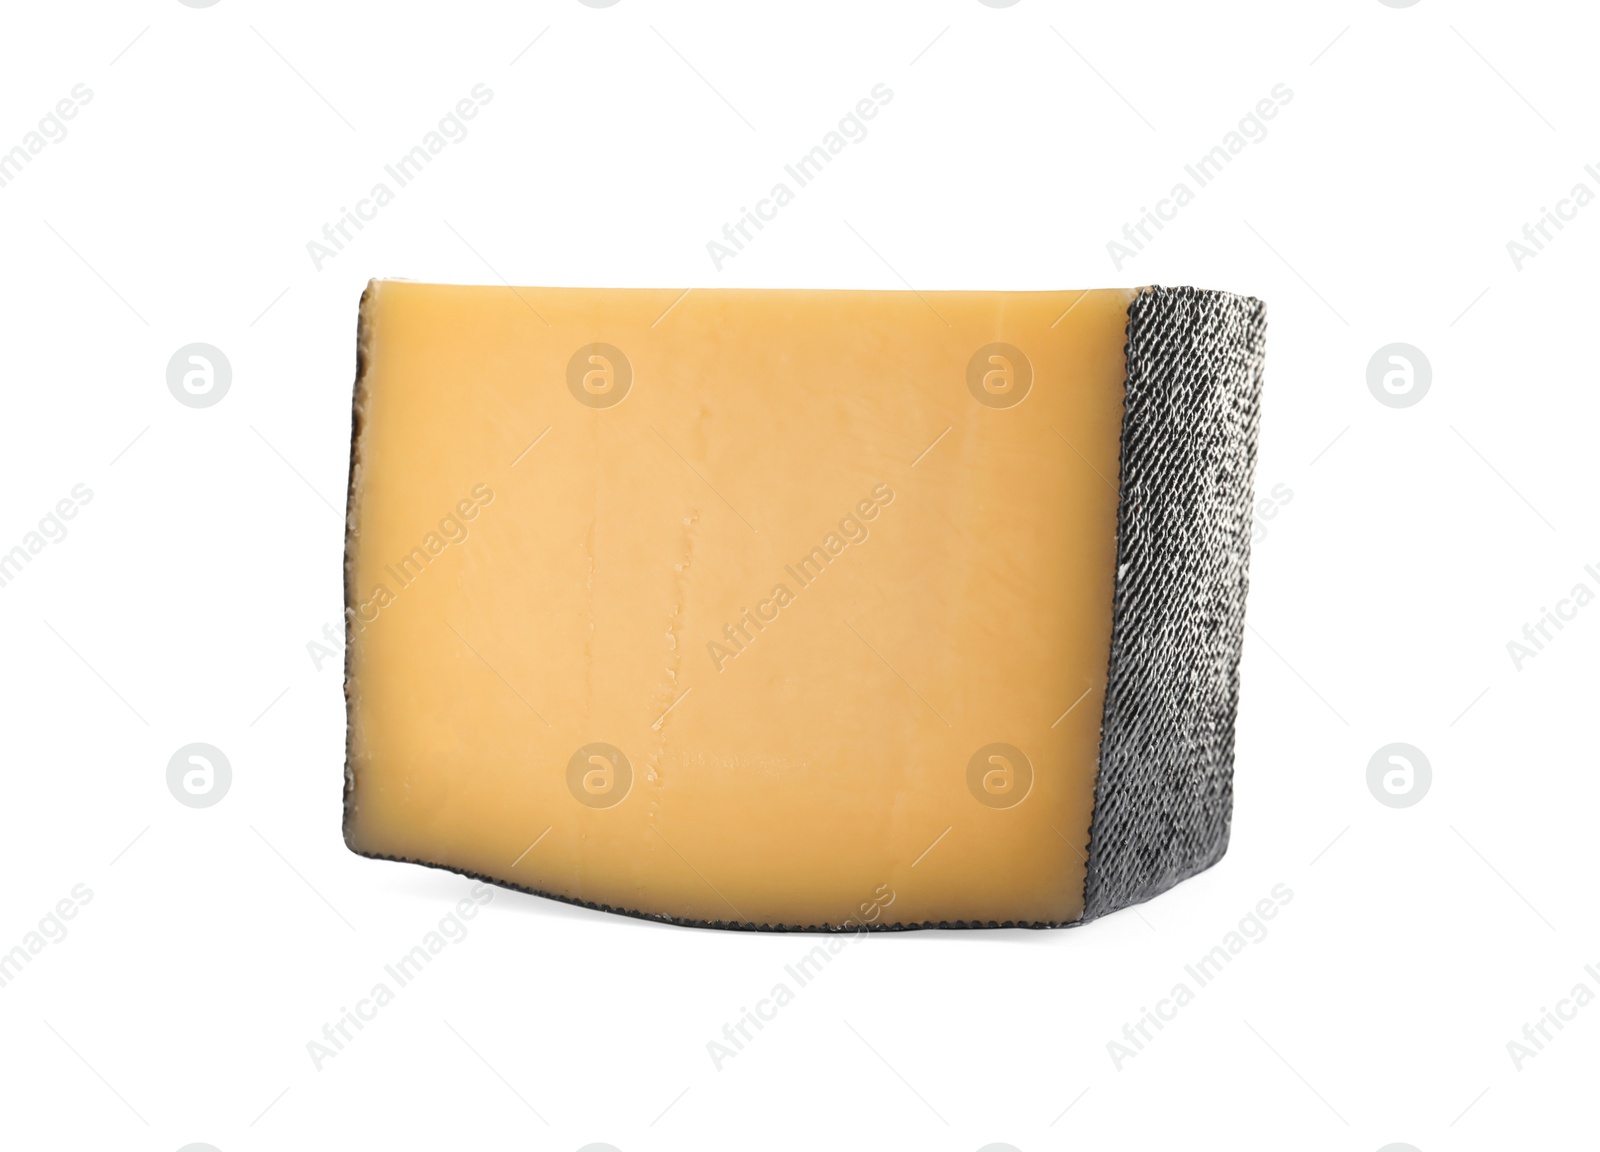 Photo of Piece of tasty fresh cheese isolated on white